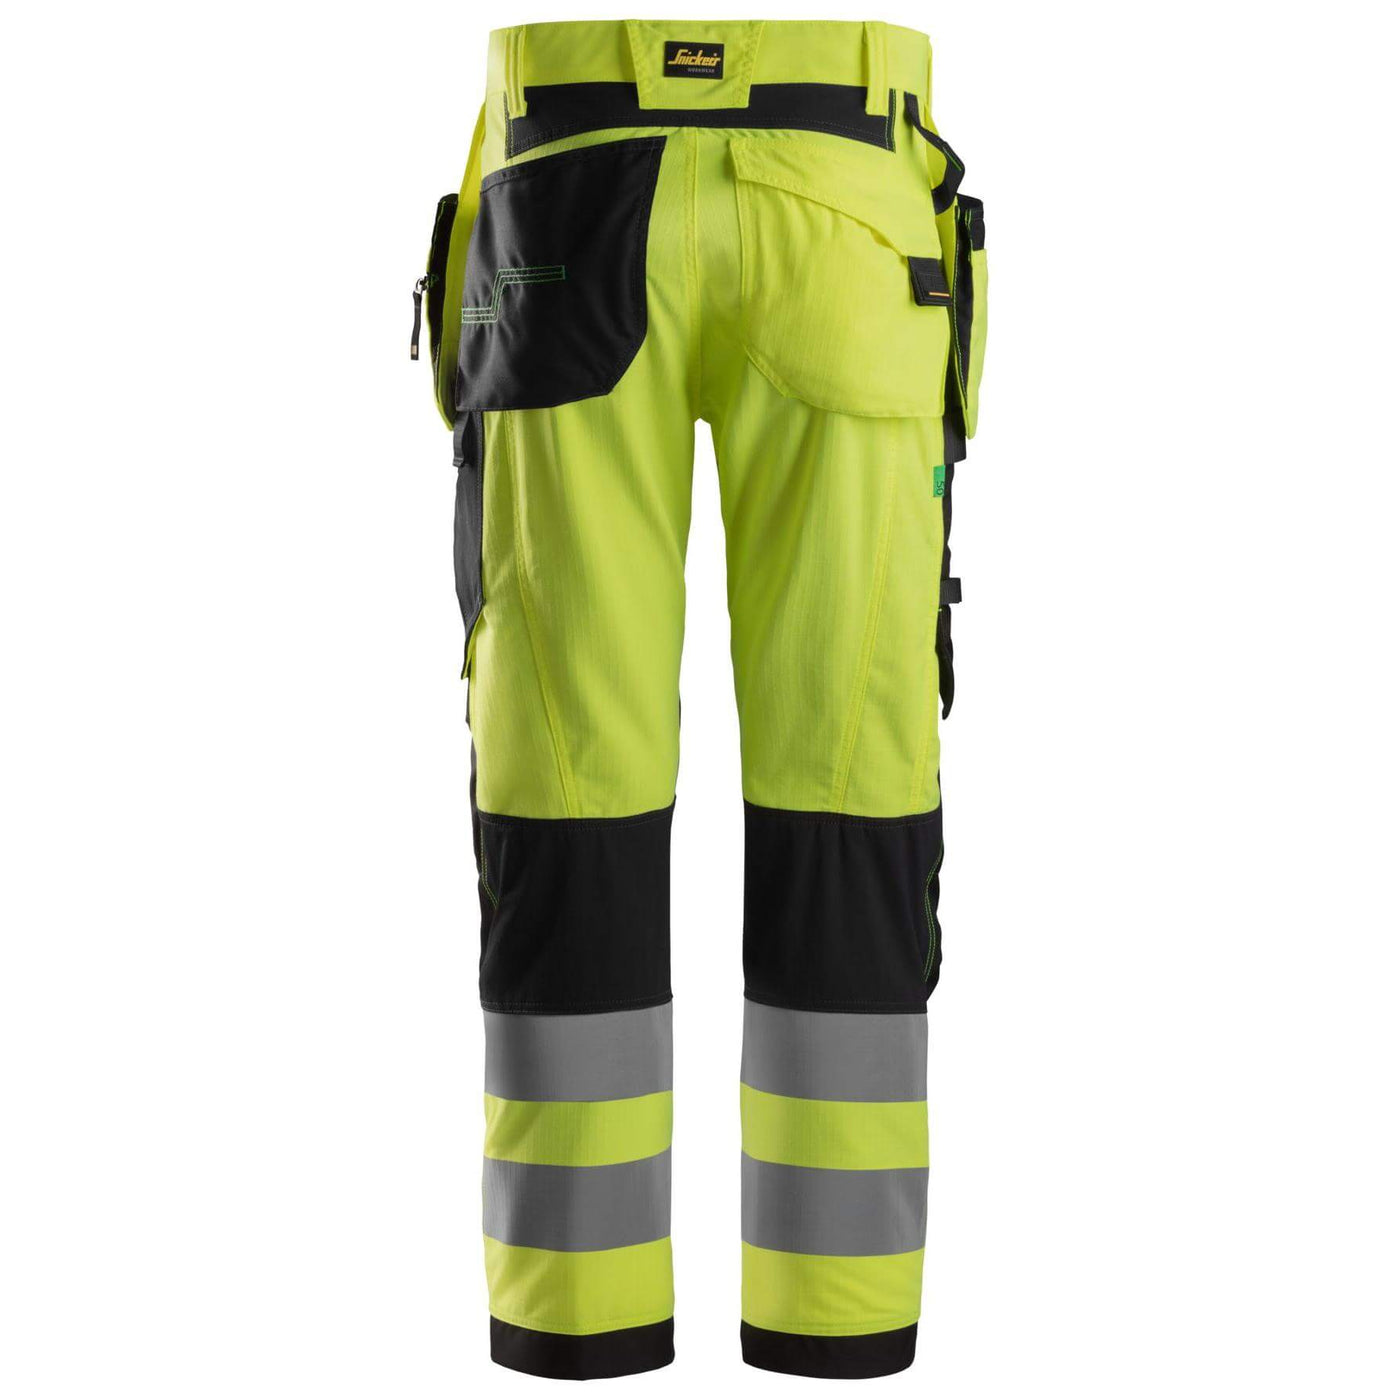 Snickers 6932 Lightweight Hi Vis Work Trousers with Holster Pockets Class 2 Hi Vis Yellow Black back #colour_hi-vis-yellow-black